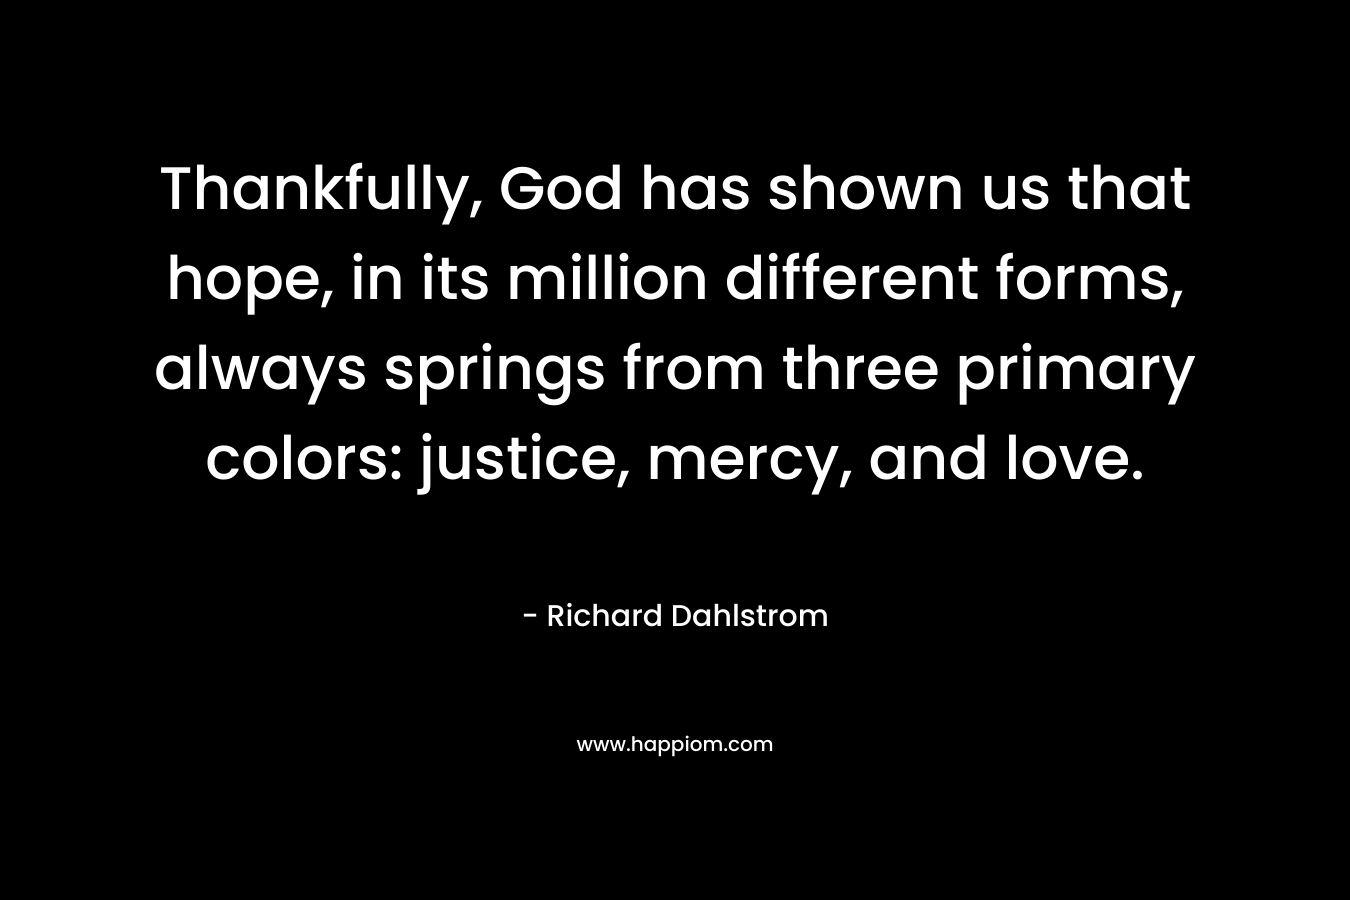 Thankfully, God has shown us that hope, in its million different forms, always springs from three primary colors: justice, mercy, and love. – Richard Dahlstrom